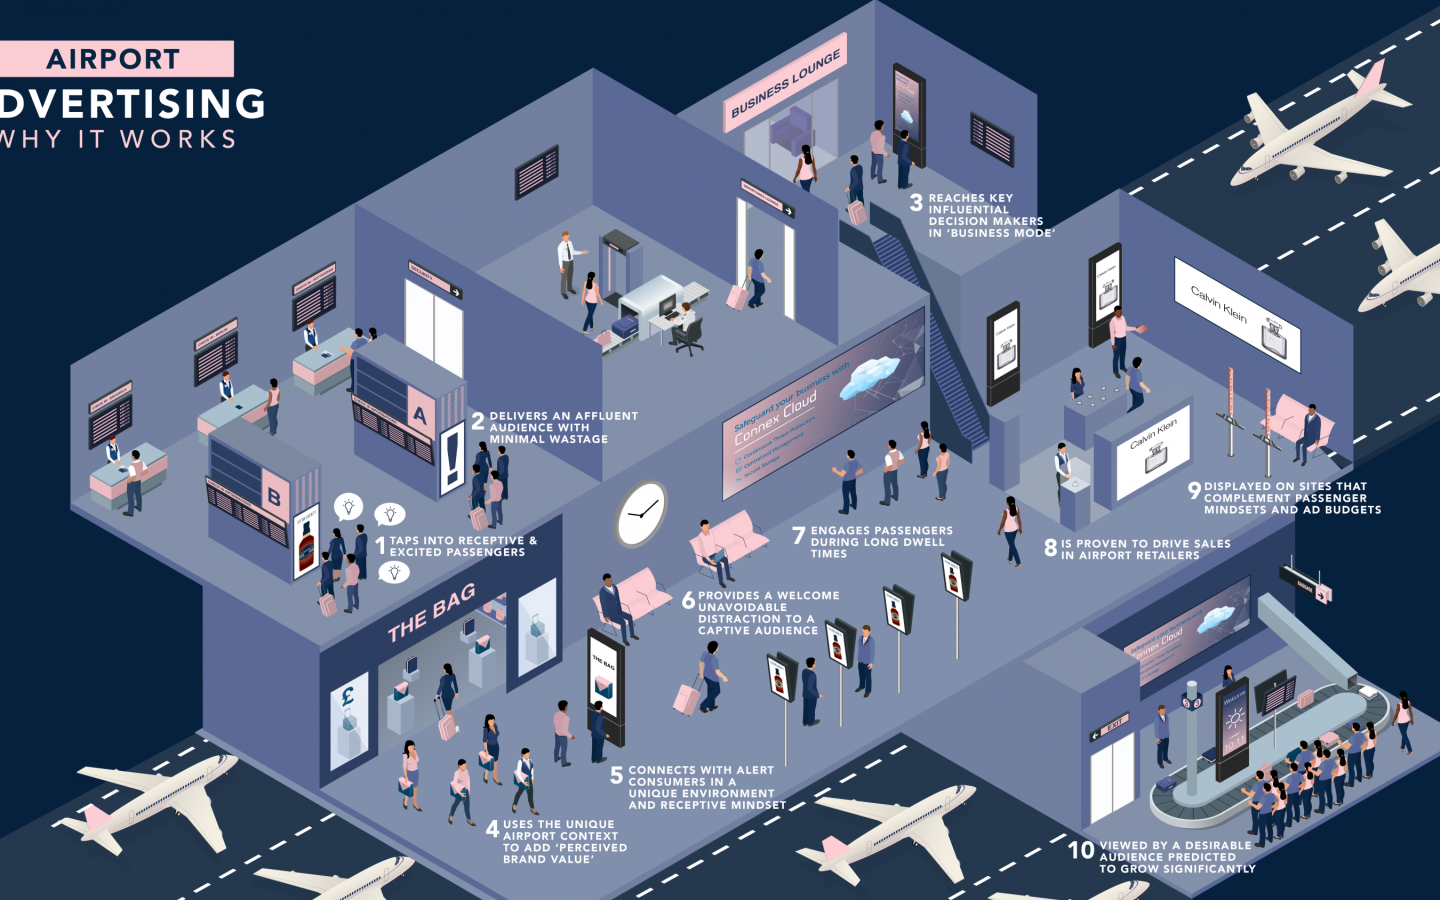 Airport Advertising 10 reasons why it works, 2018-04, Infographic